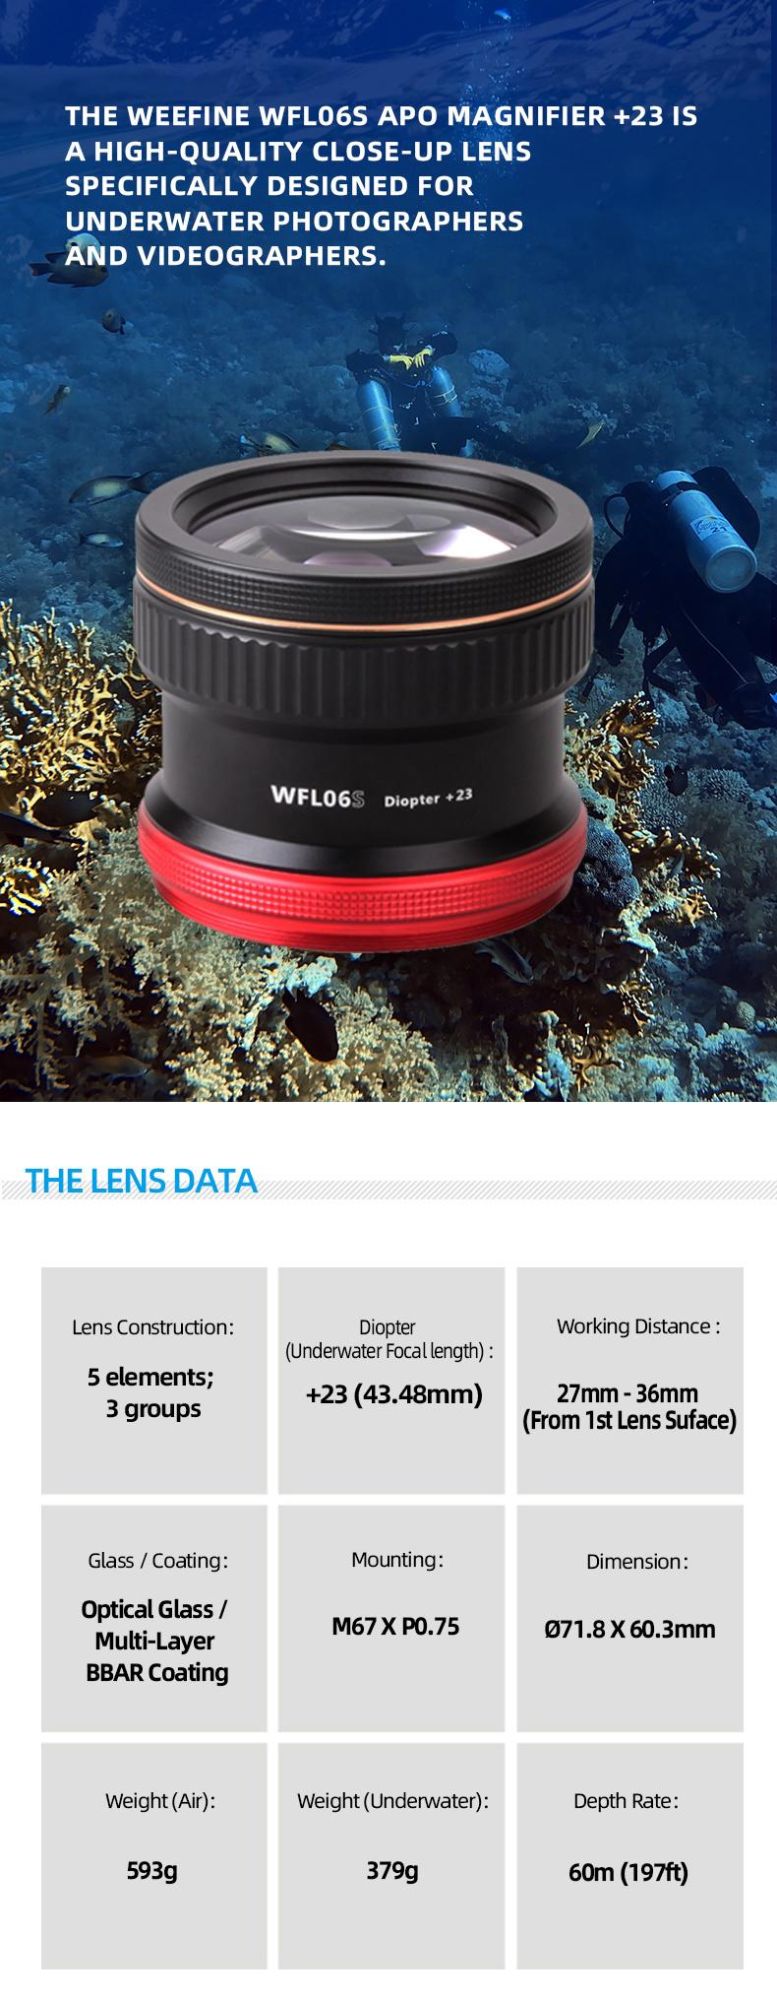 Working Distance 27mm – 36mm Very Close-up Underwater Camera Lens for Videographers